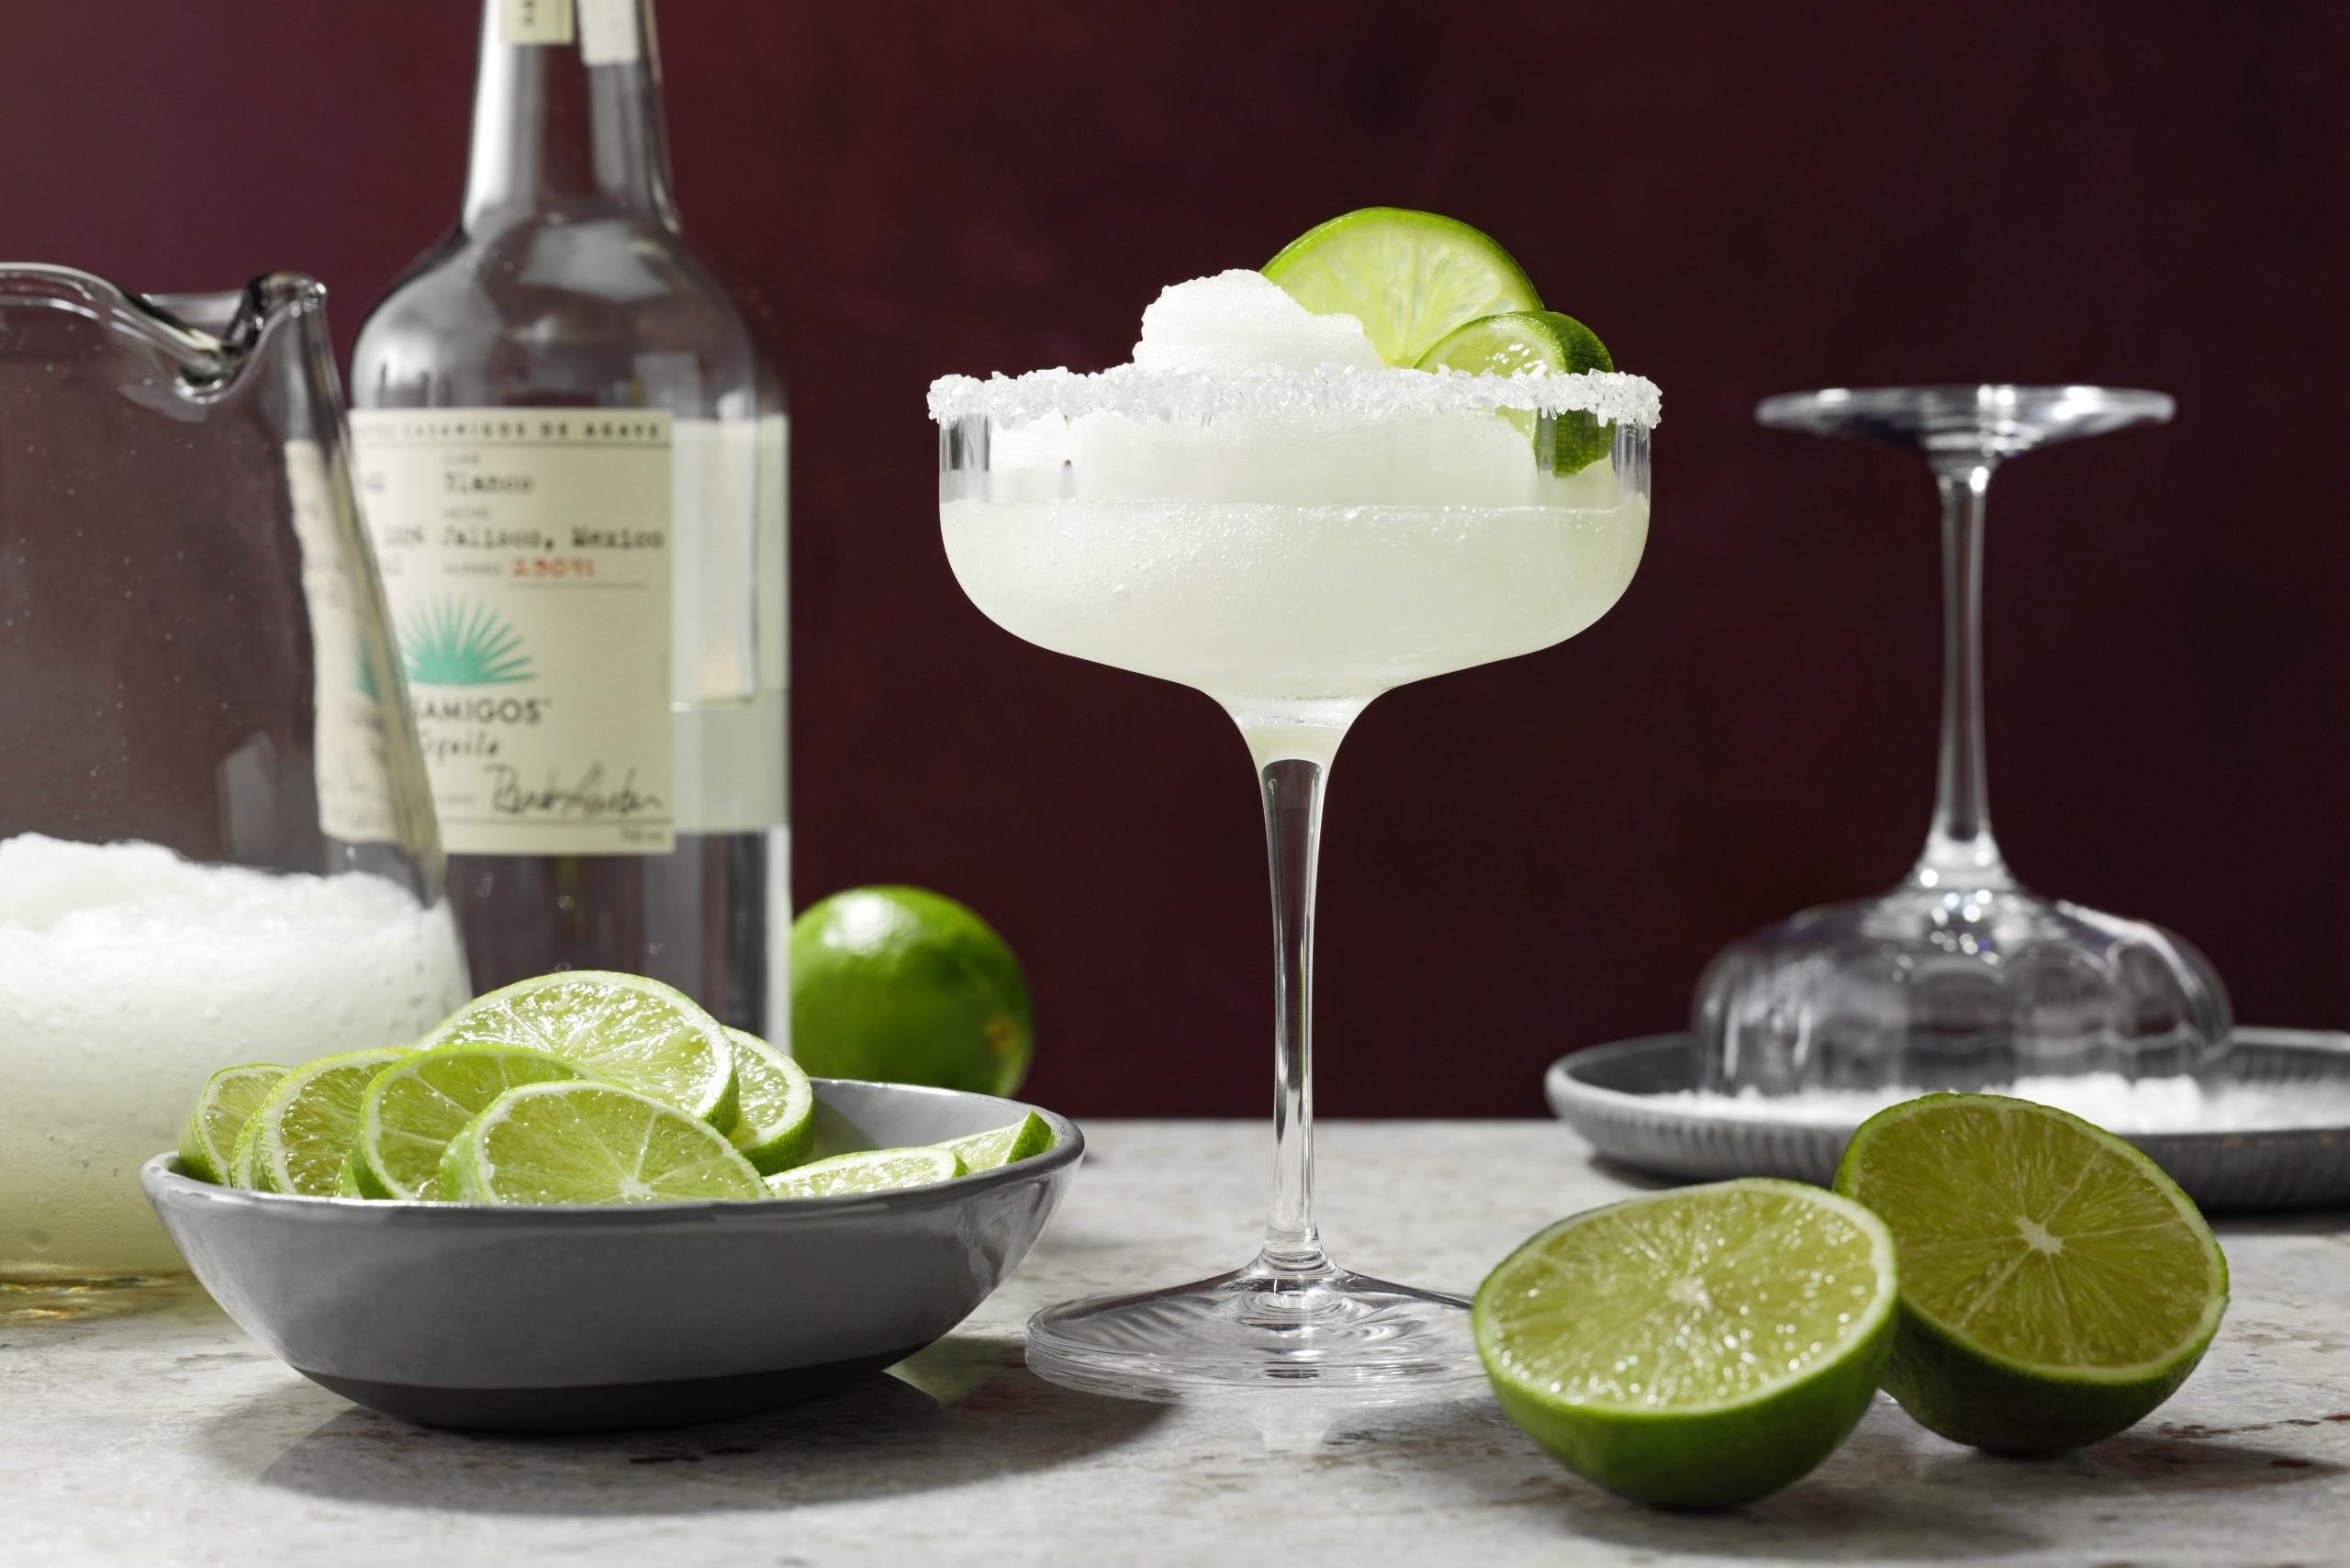 How to Make Frozen Margaritas at Home I Recipe and Tips